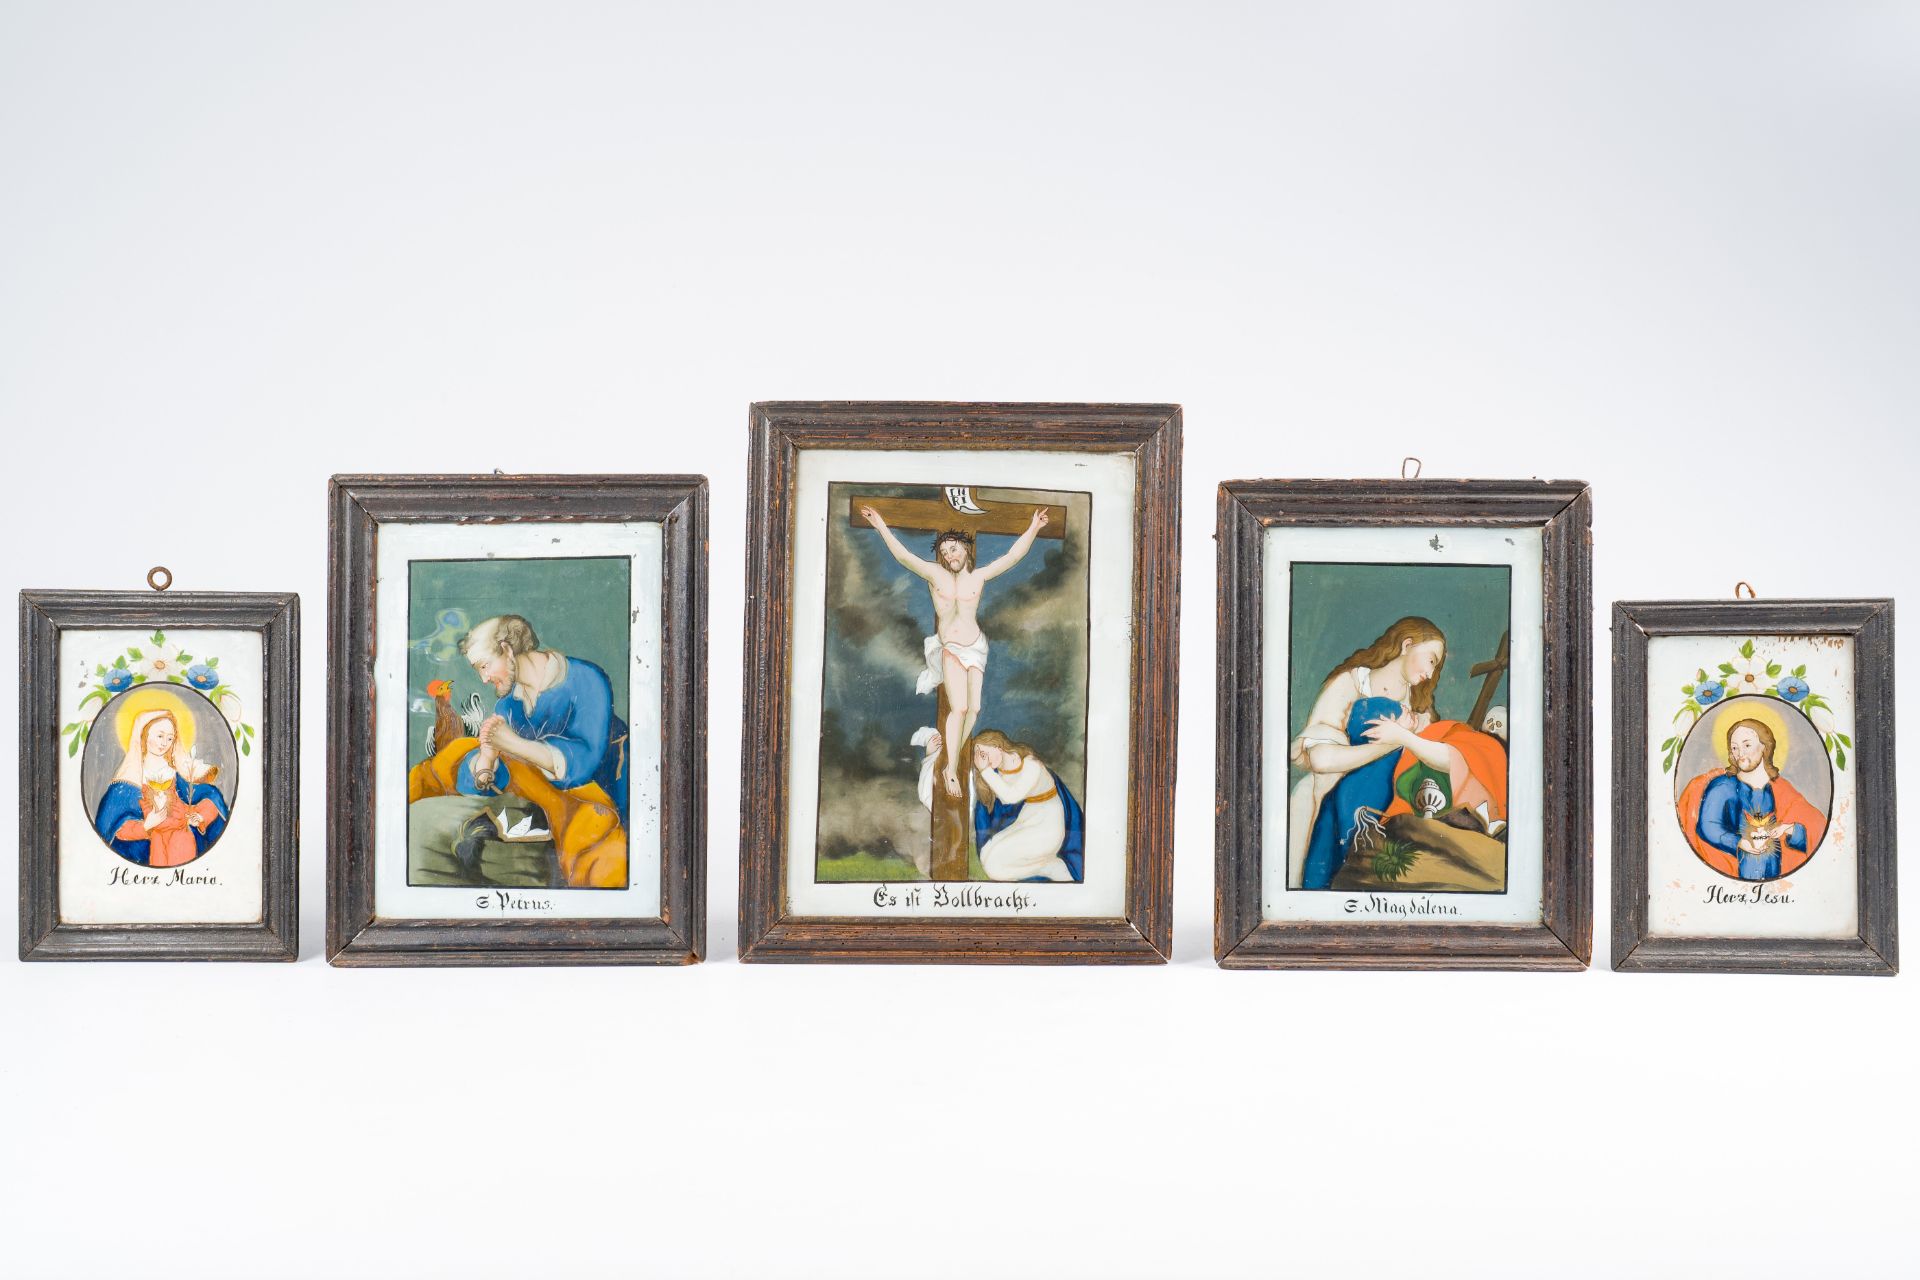 German school: Five different religious scenes, reverse glass painting, 18th/19th C. - Image 2 of 8